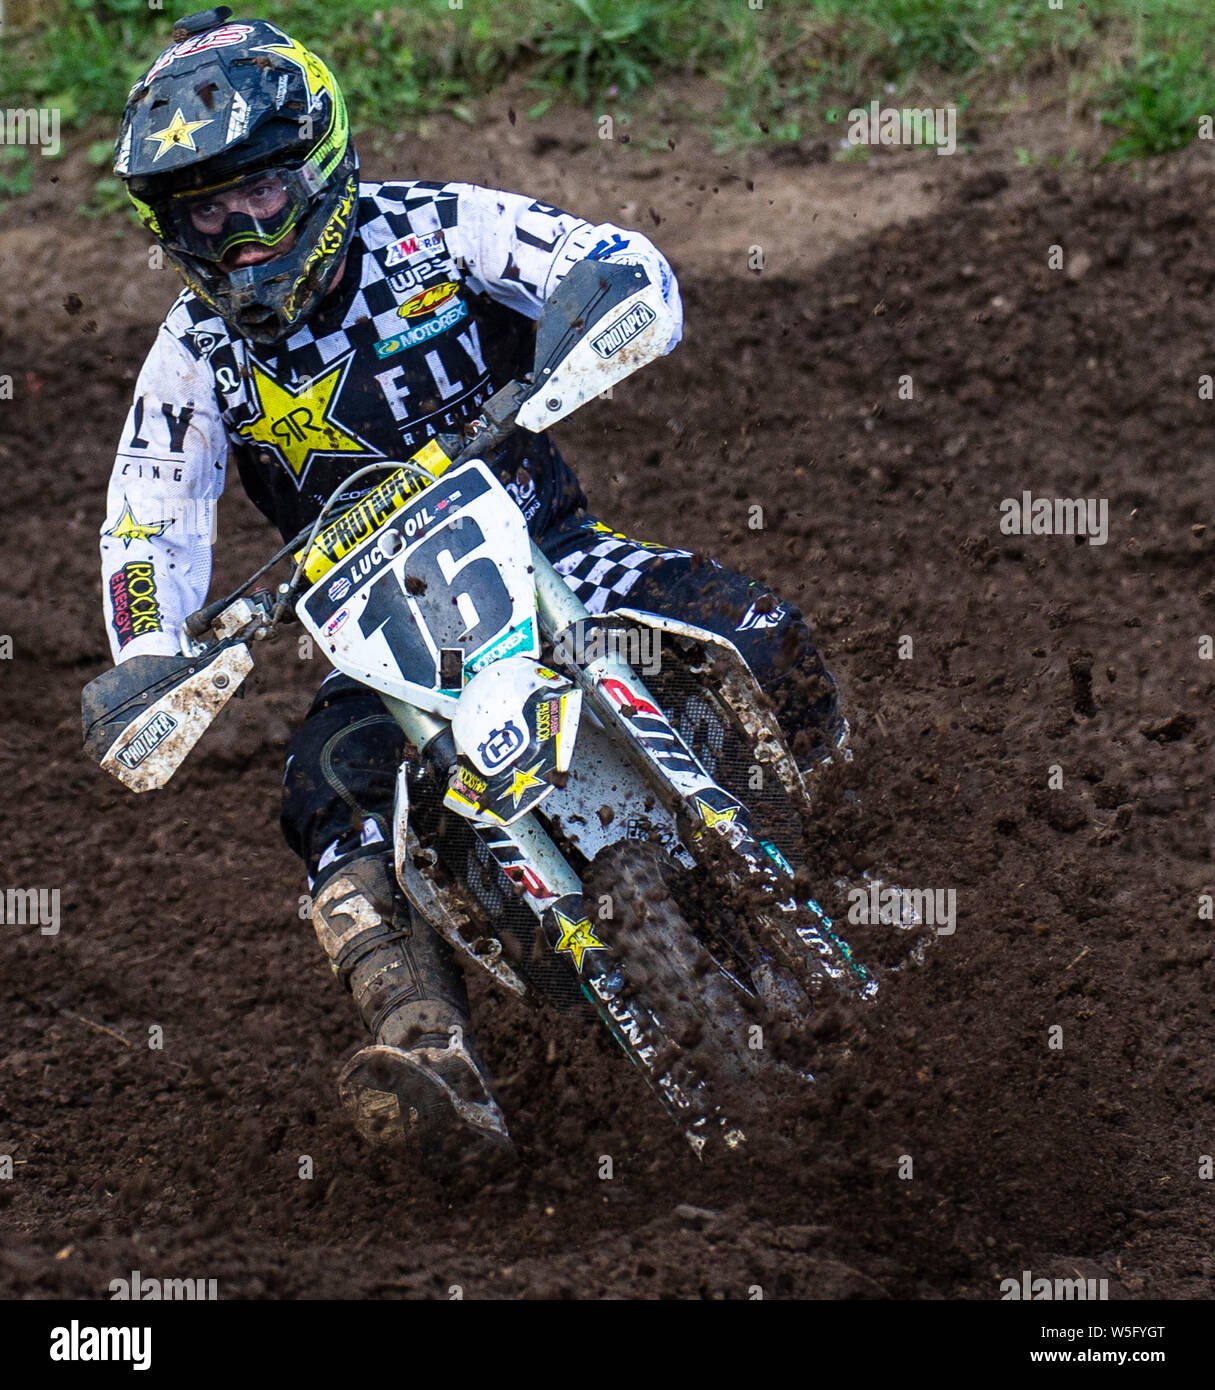 Washougal, WA USA. 27th July, 2019. # 16 Zach Osborne coming out of turn 25 during the Lucas Oil Pro Motocross Washougal National 450 class championship at Washougal MX park Washougal, WA Thurman James/CSM/Alamy Live News Stock Photo